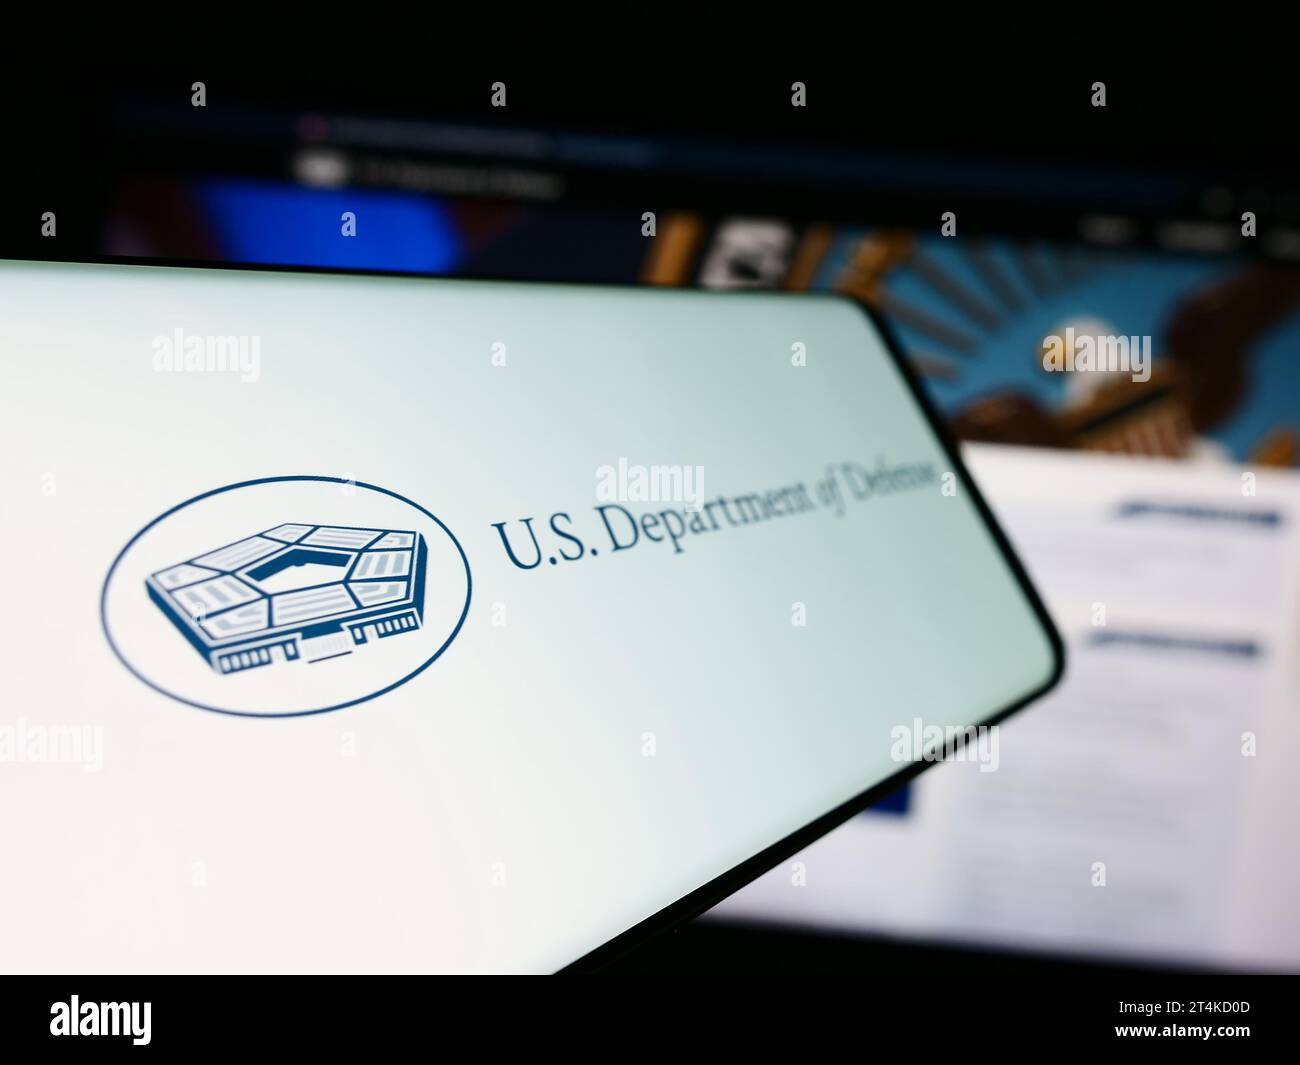 Cellphone with logo of United States Department of Defense (DoD) in front of website. Focus on center-left of phone display. Stock Photo